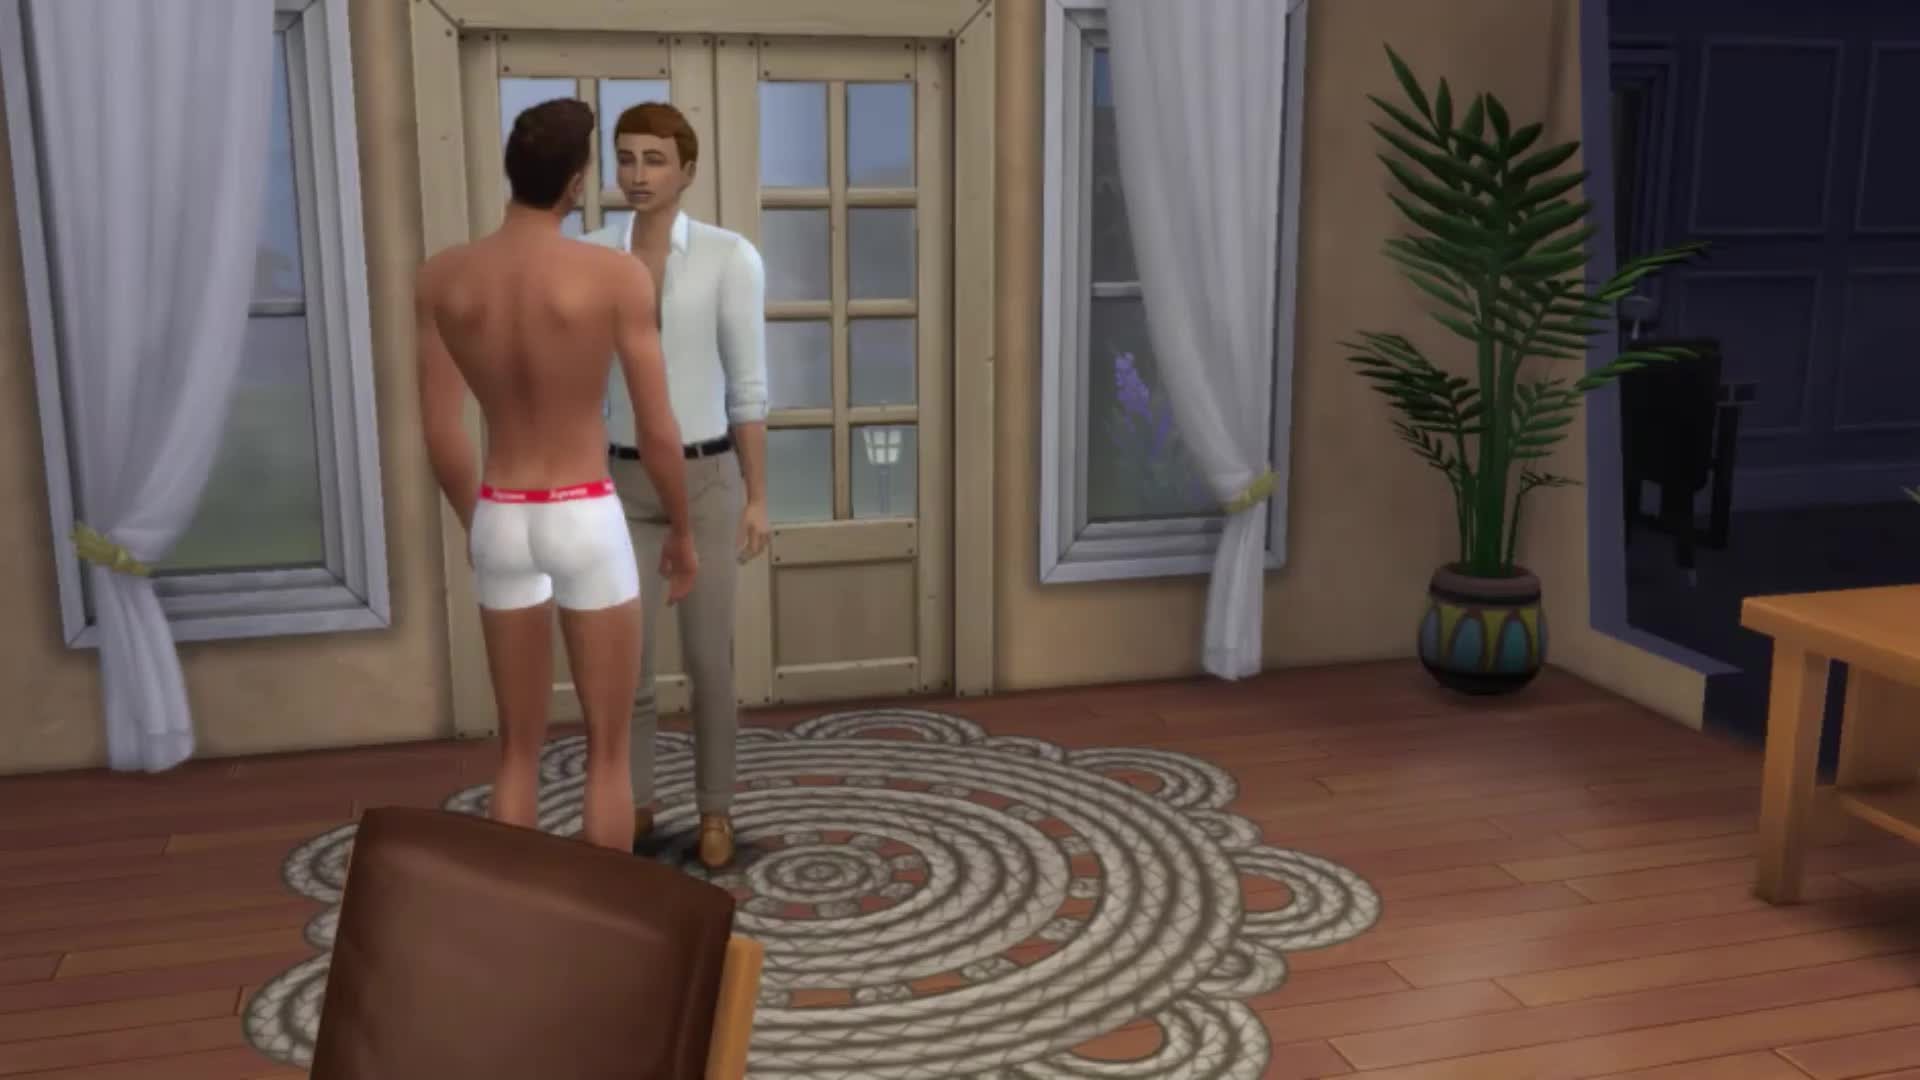 Video post by Sims4Men